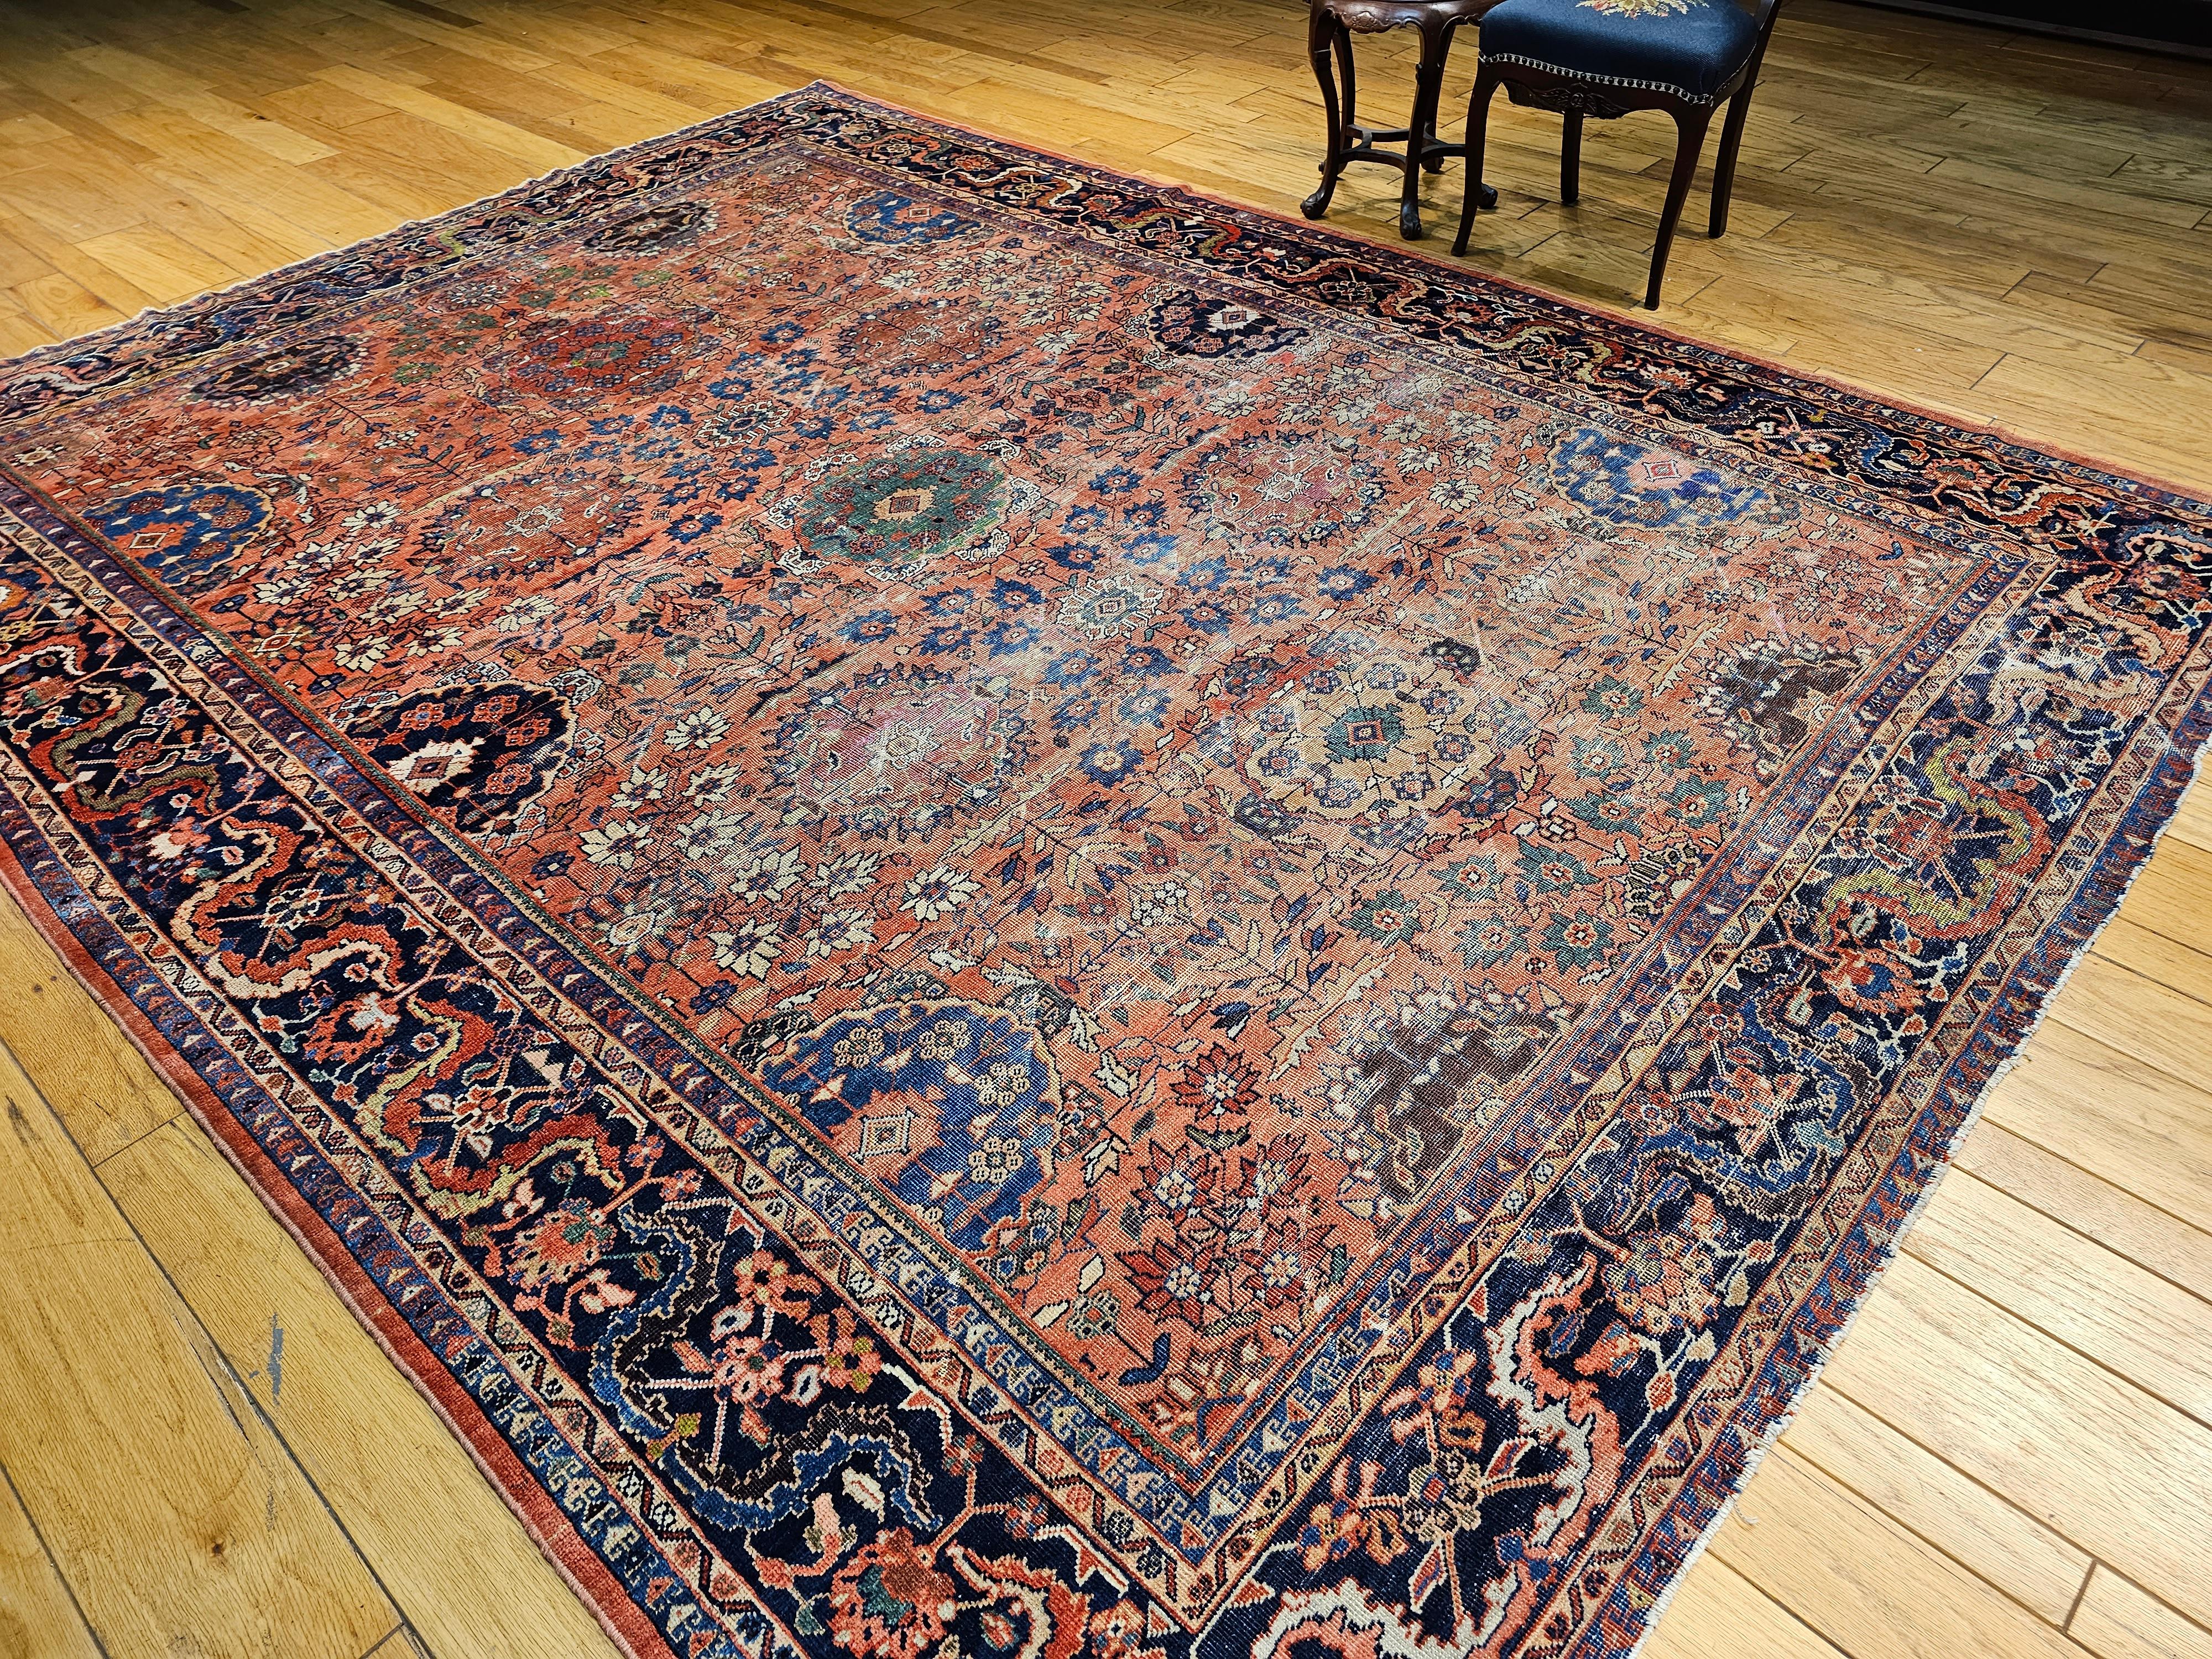 Vintage Persian Mahal Sultanabad Room Size Rug in Brick Red, Navy Blue 5